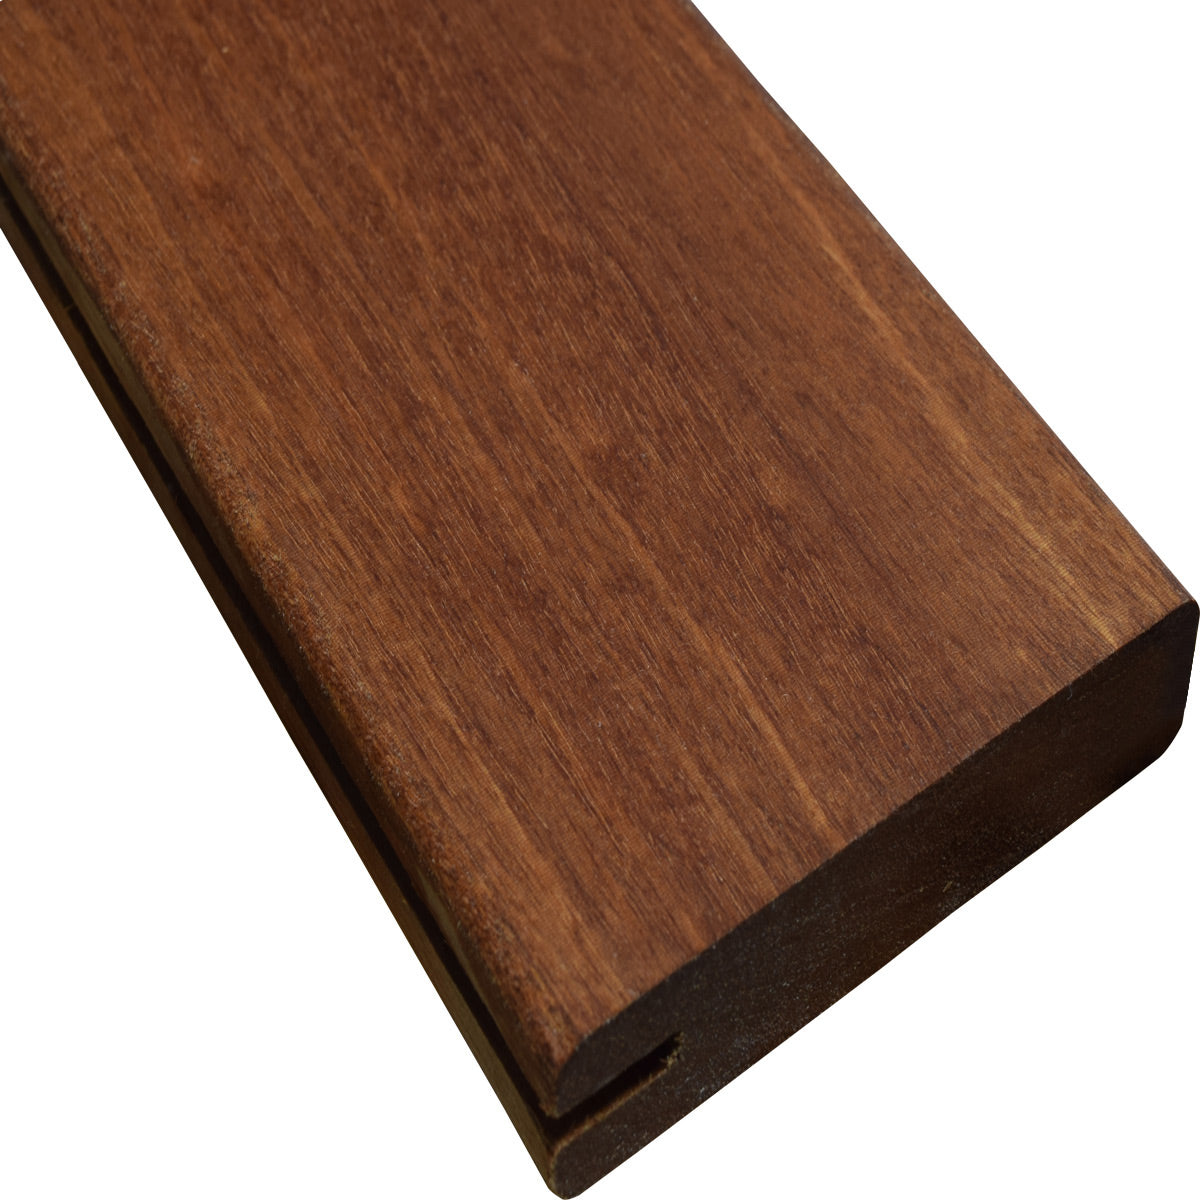 5/4 x 4 Mahogany (Red Balau) Wood One Sided Pre-Grooved Decking